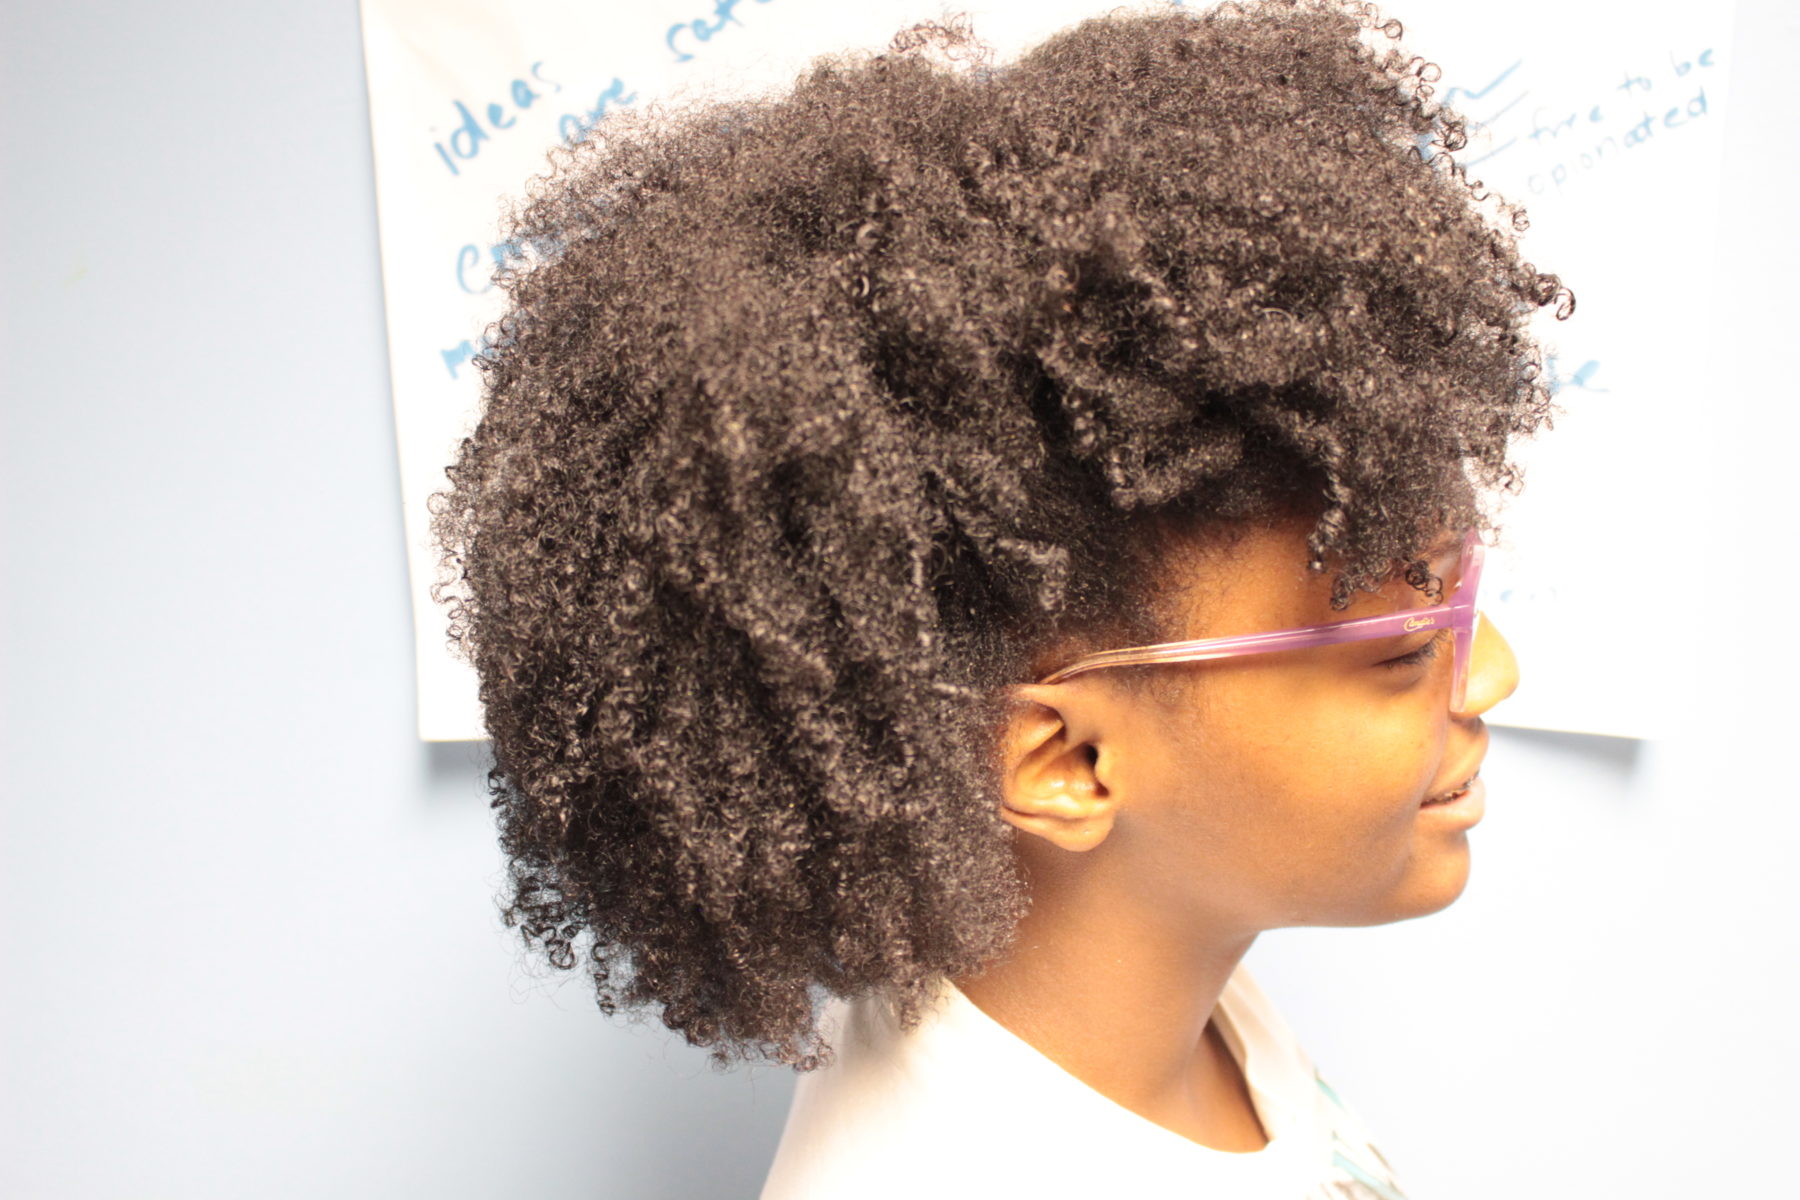 The Controversy Over Natural Hair in the Workplace and at School